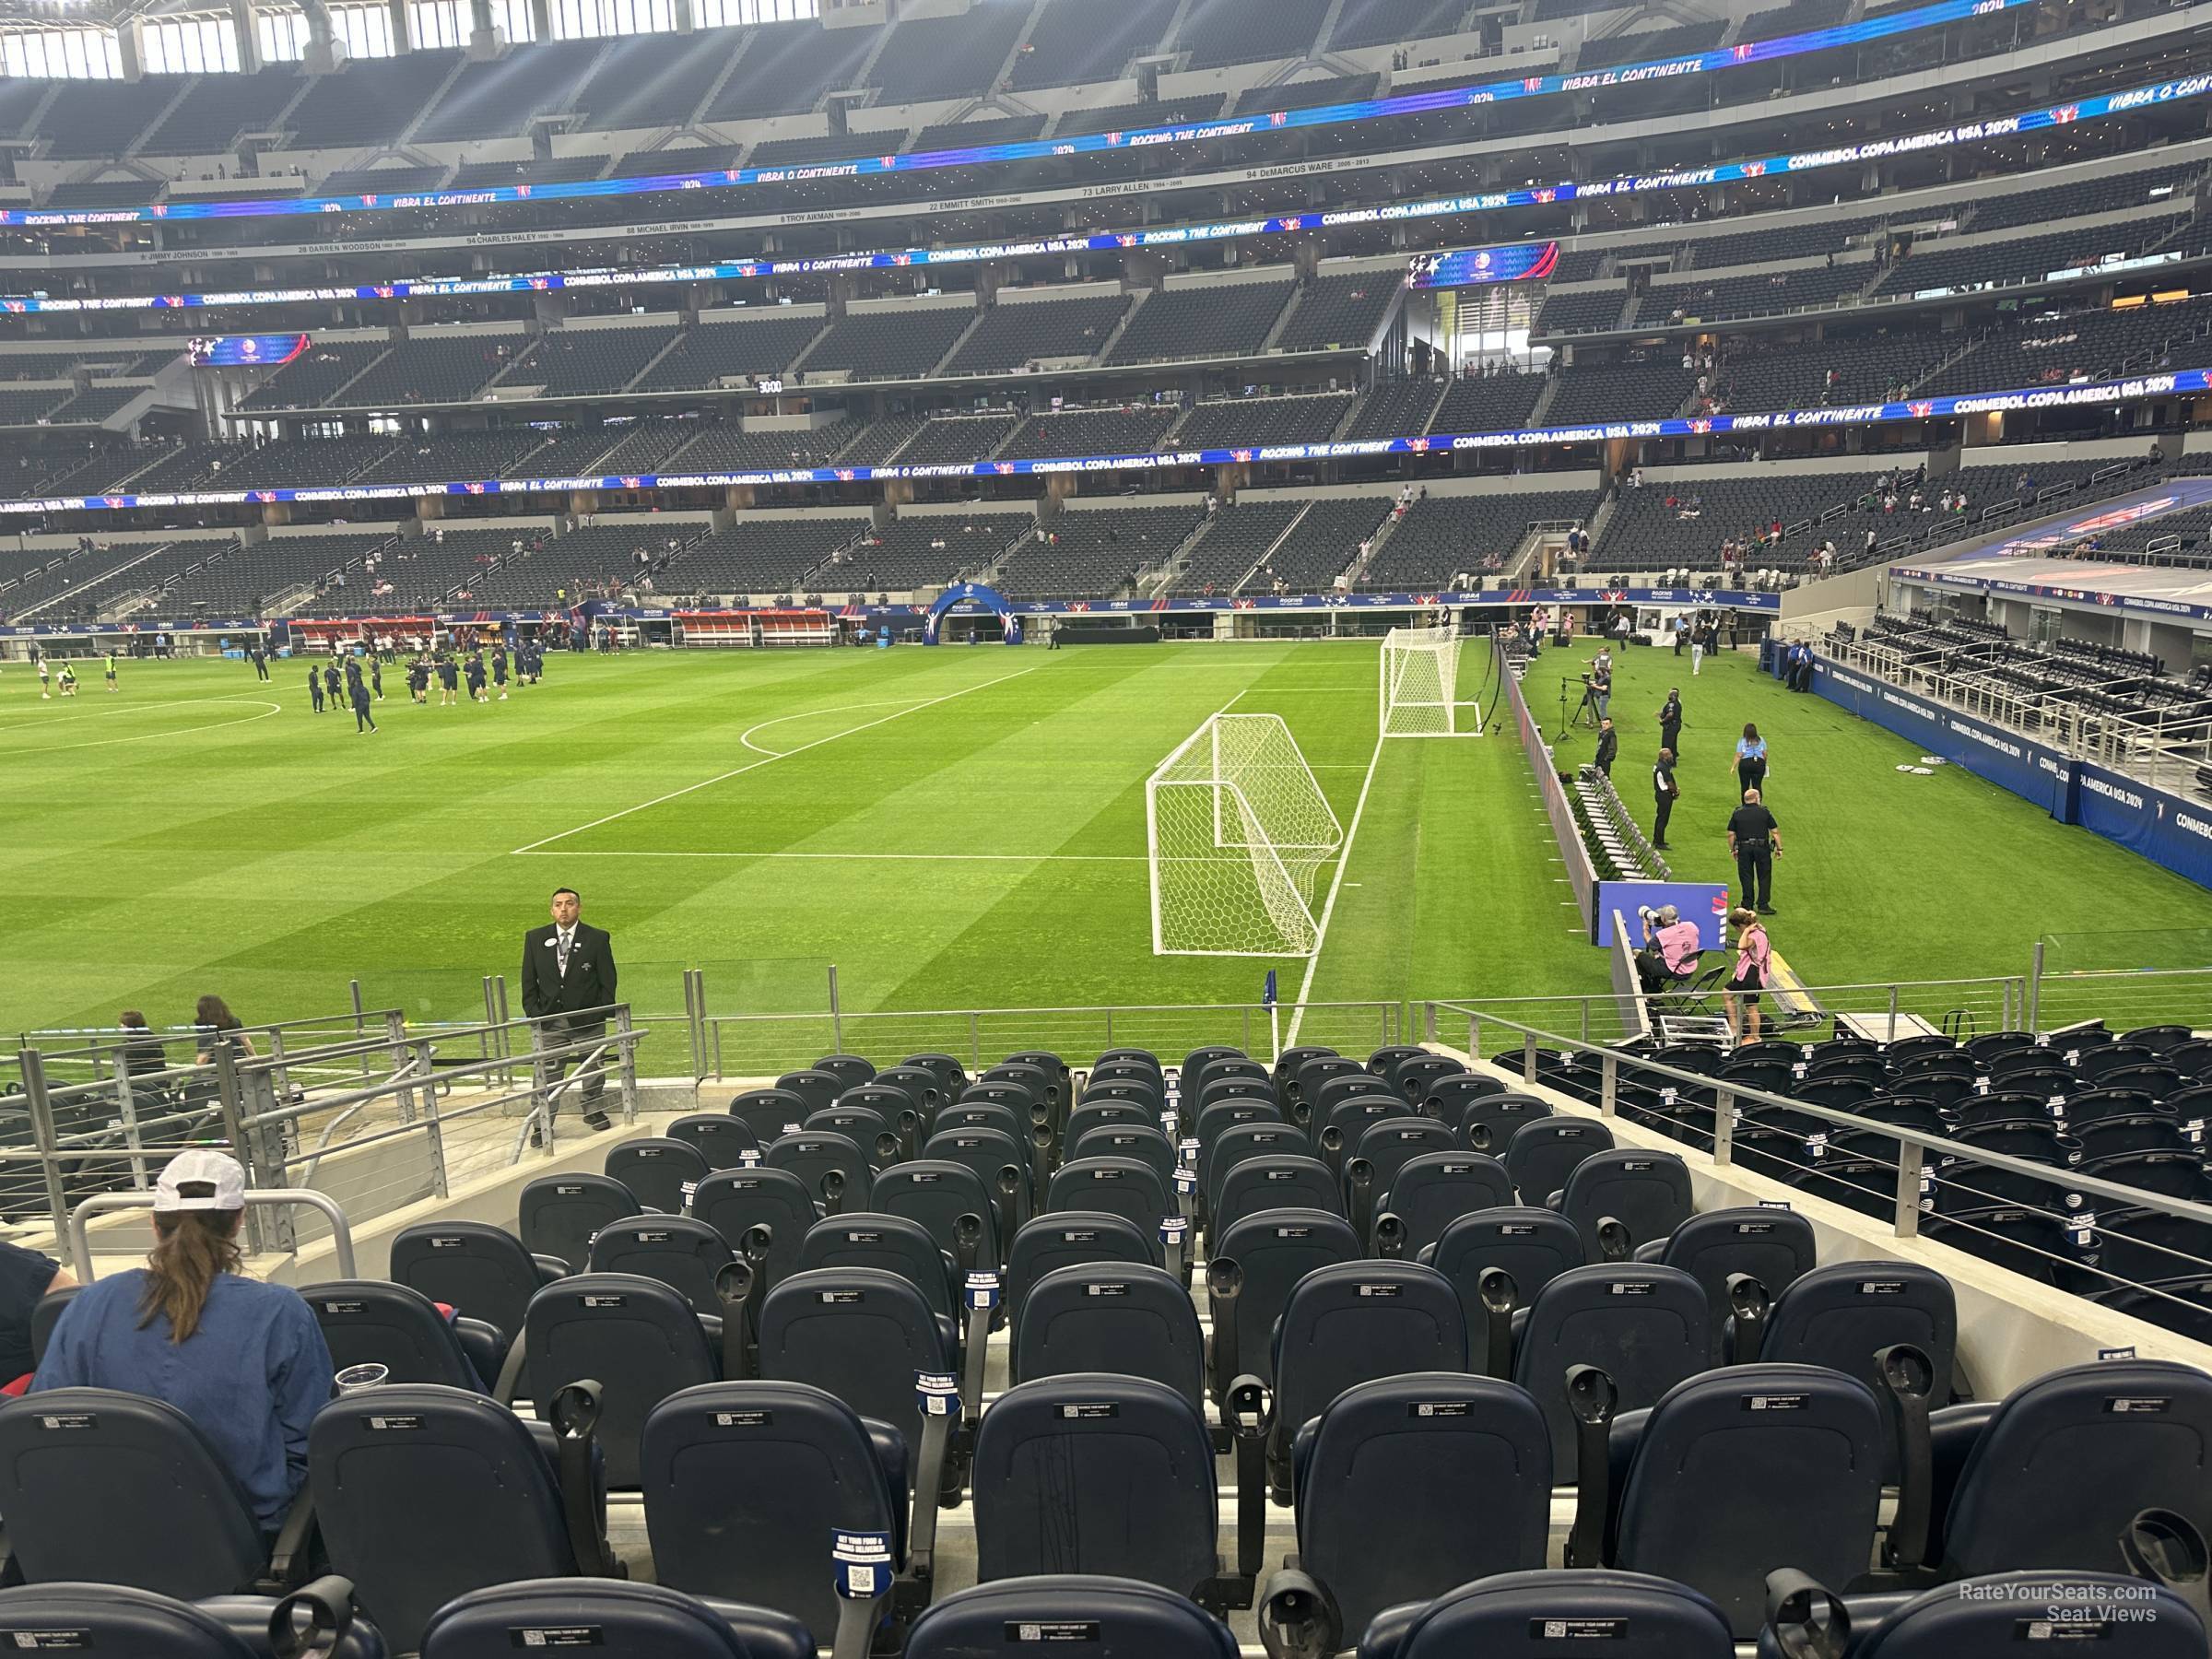 section c106, row 13 seat view  for soccer - at&t stadium (cowboys stadium)